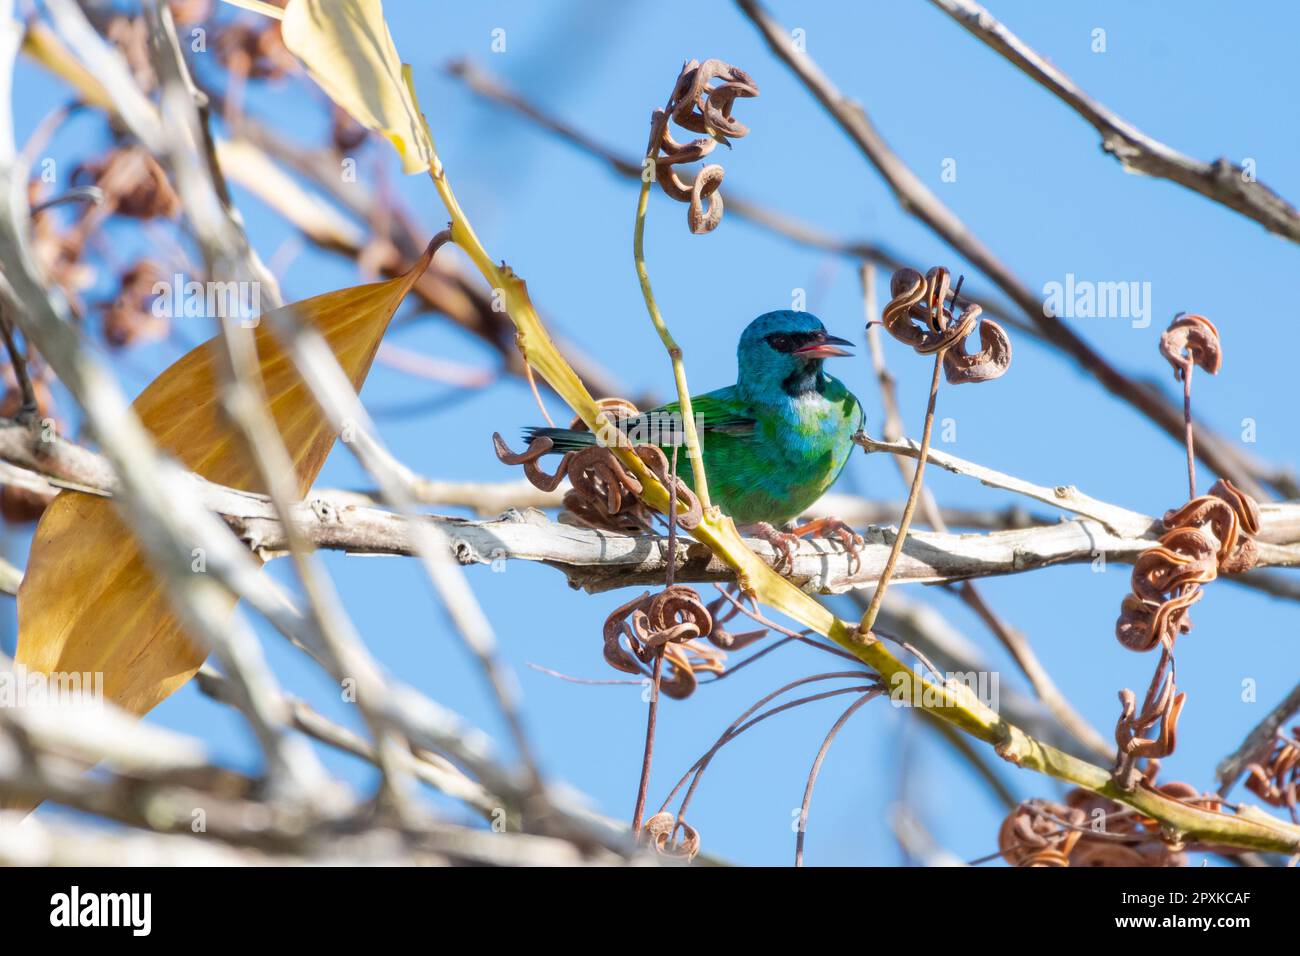 Tropical bird, the Blue Dacnis, chirping in dry branches of a tree Stock Photo